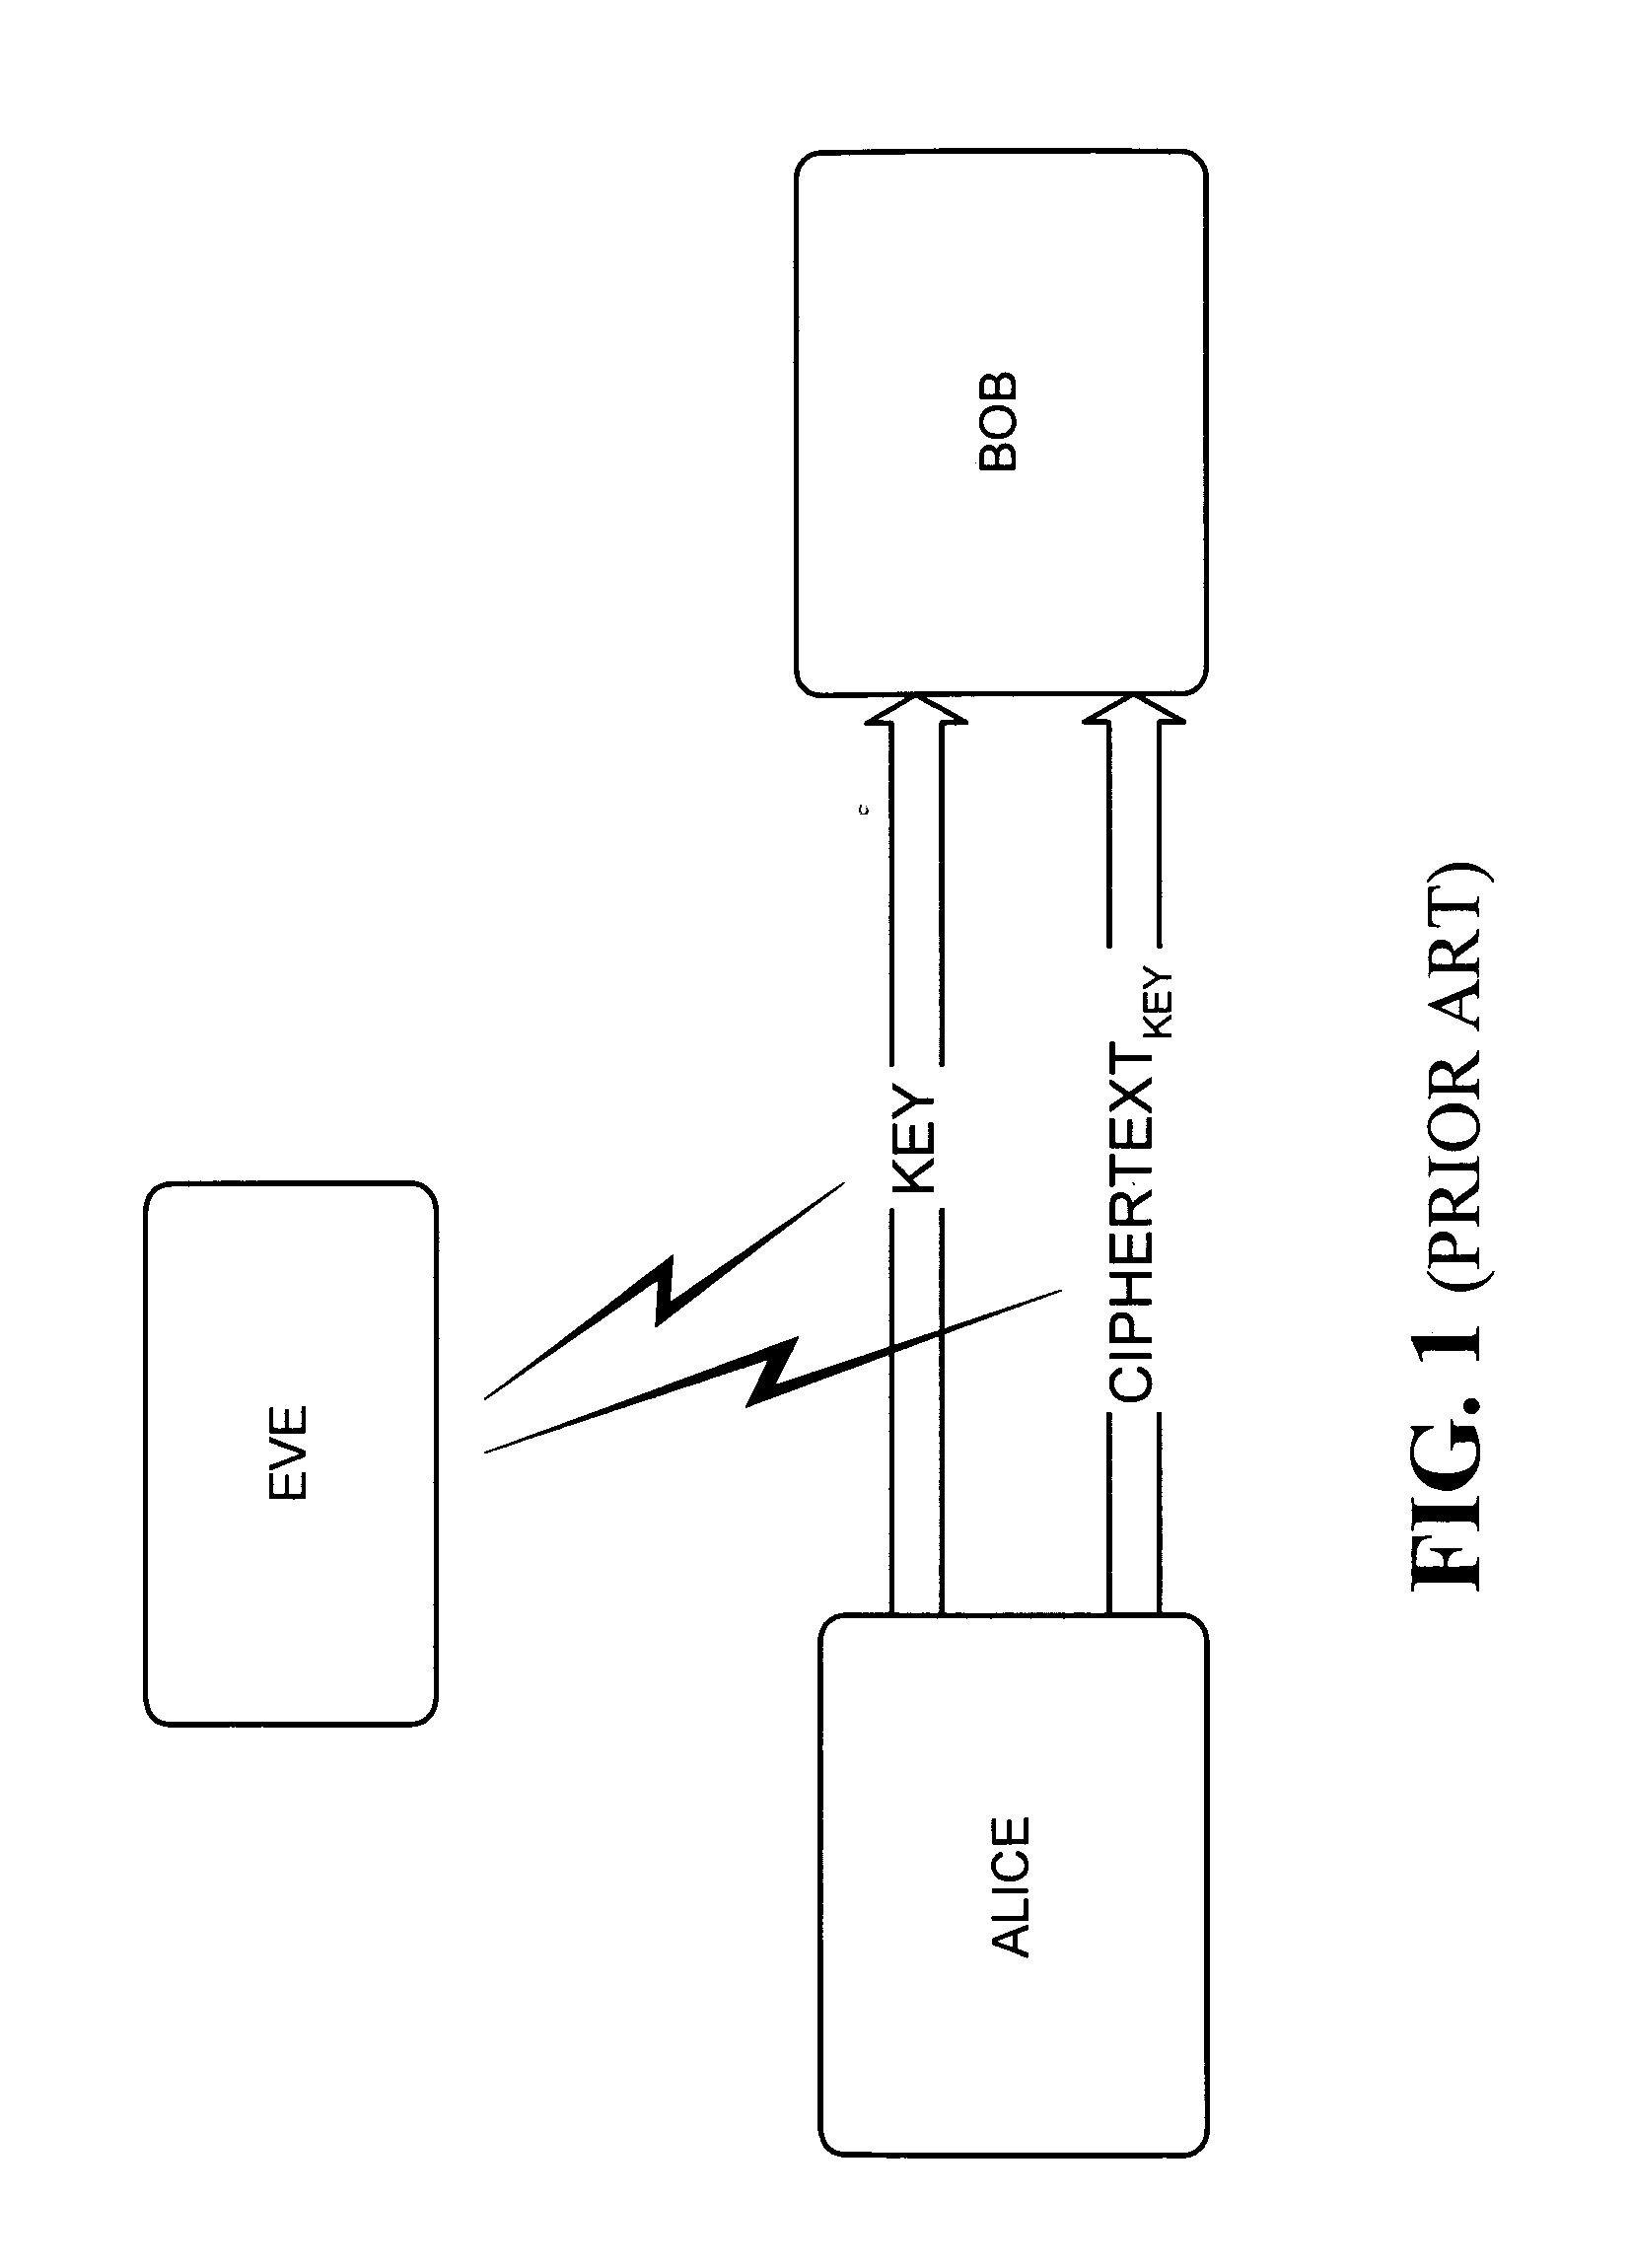 Systems and methods for framing quantum cryptographic links